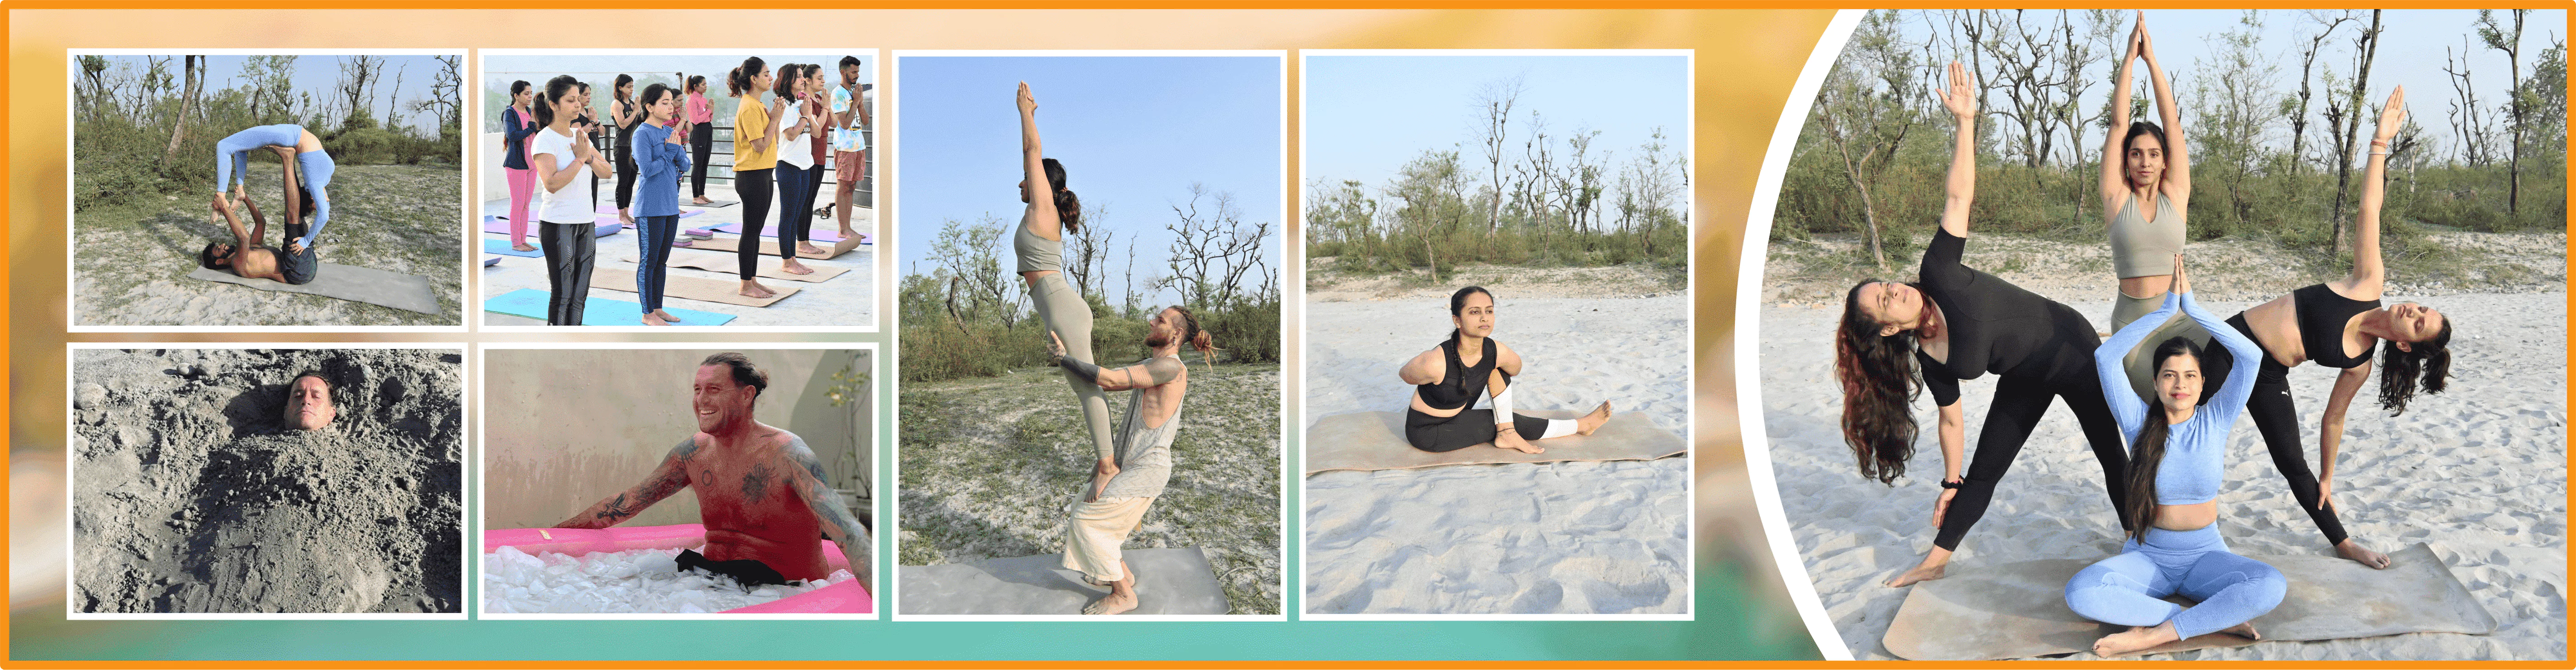 3 yoga poses for balance and strength - The Yoga Institute Goa